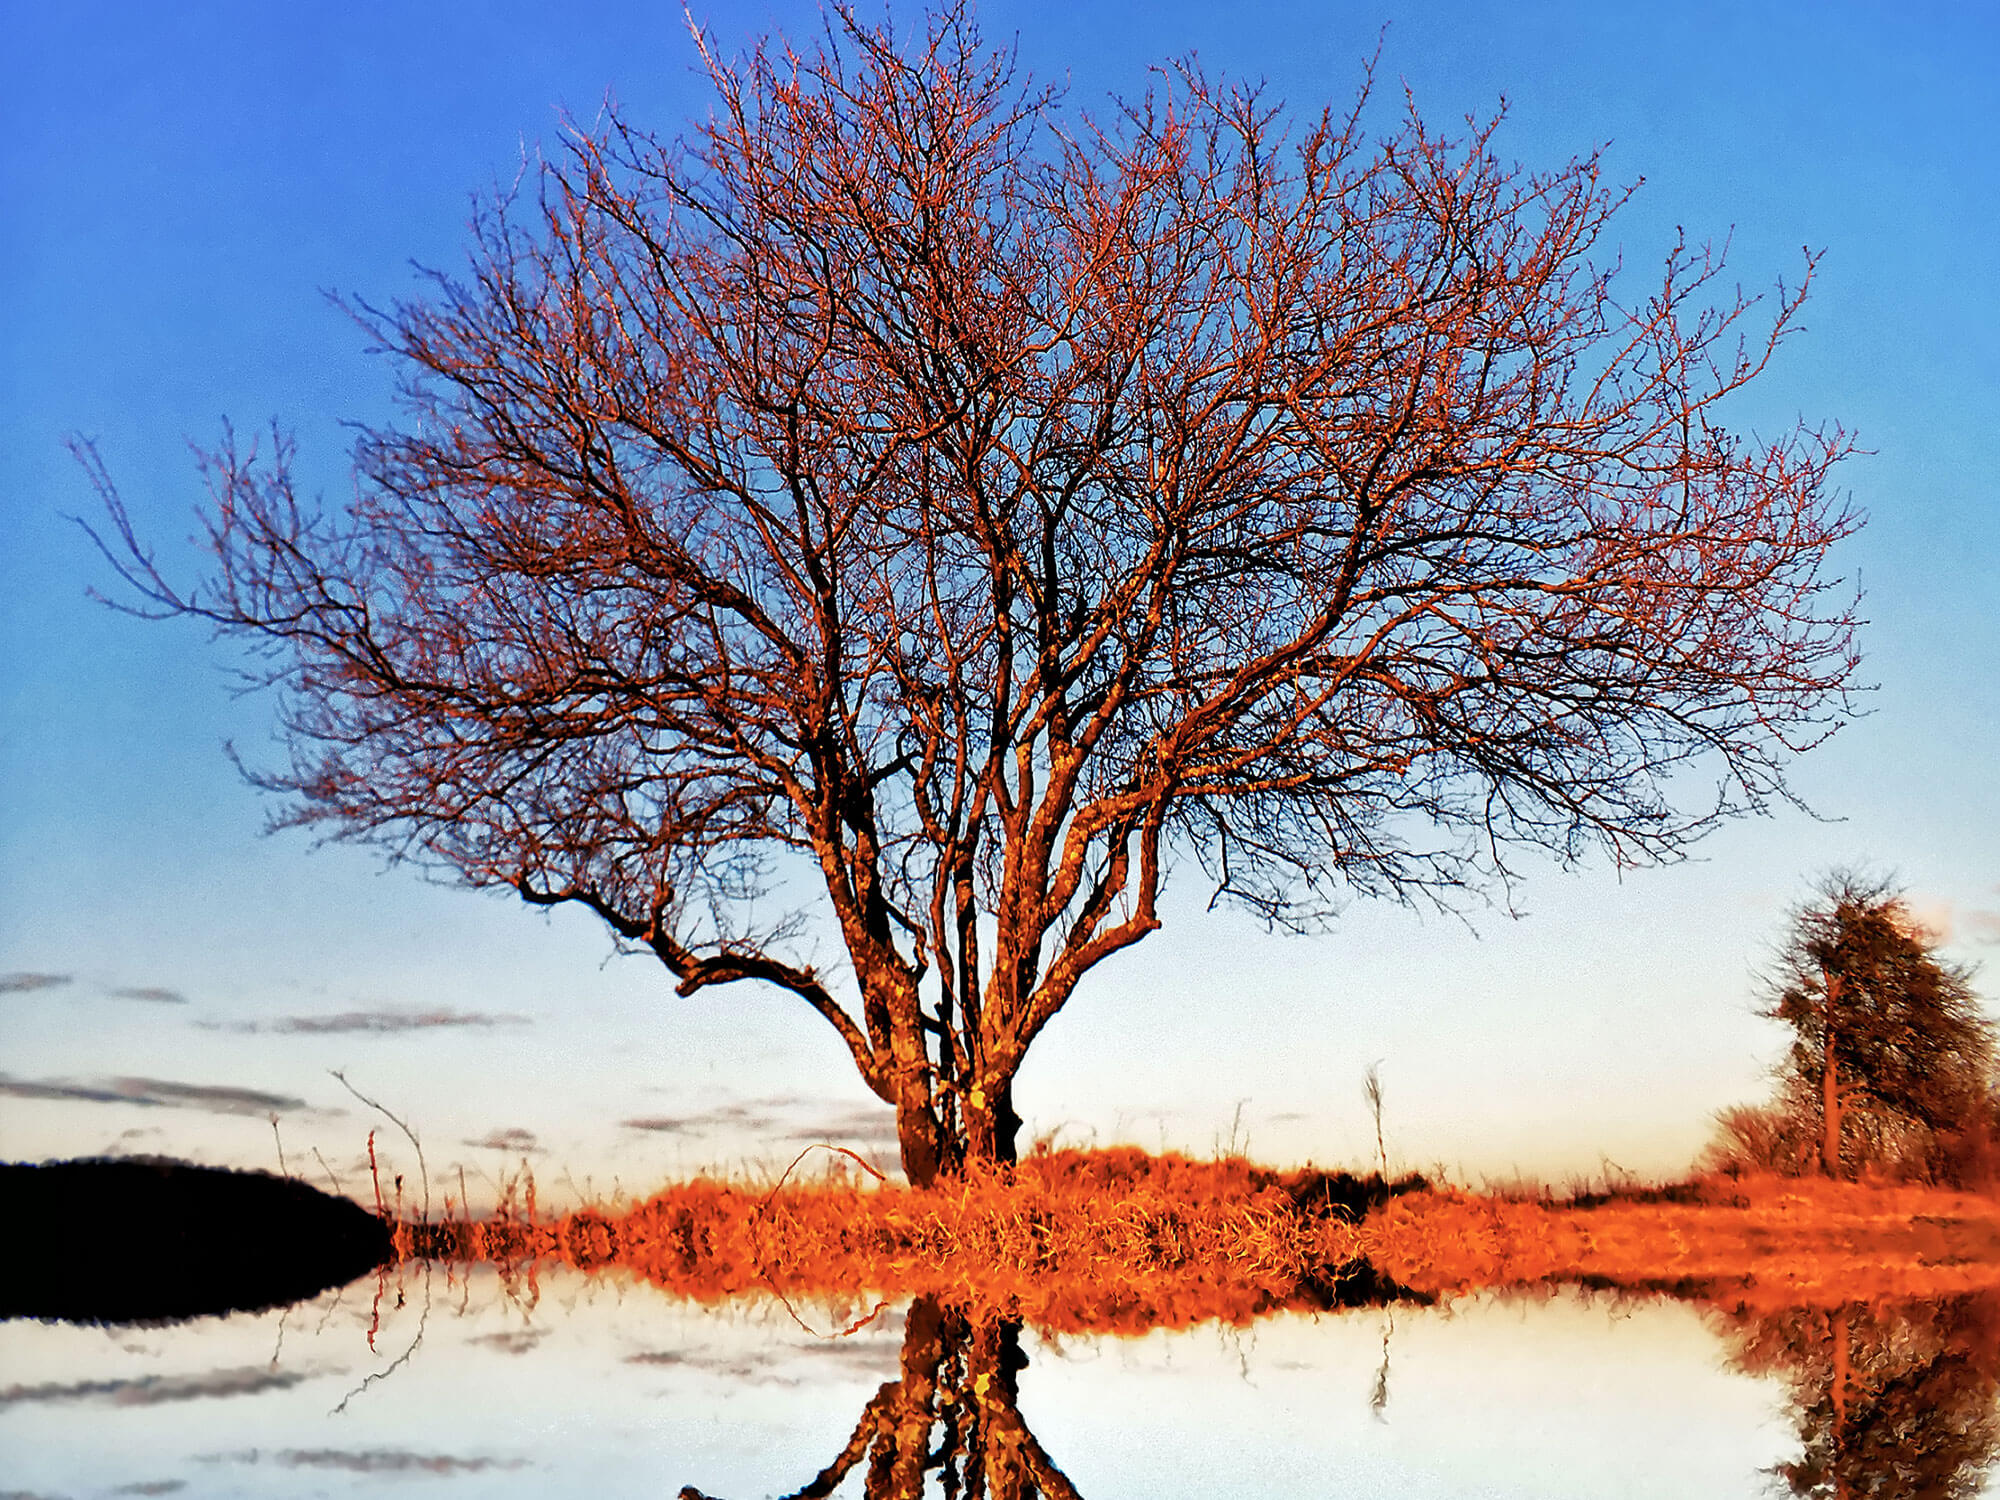 background image of a tree and reflecting water